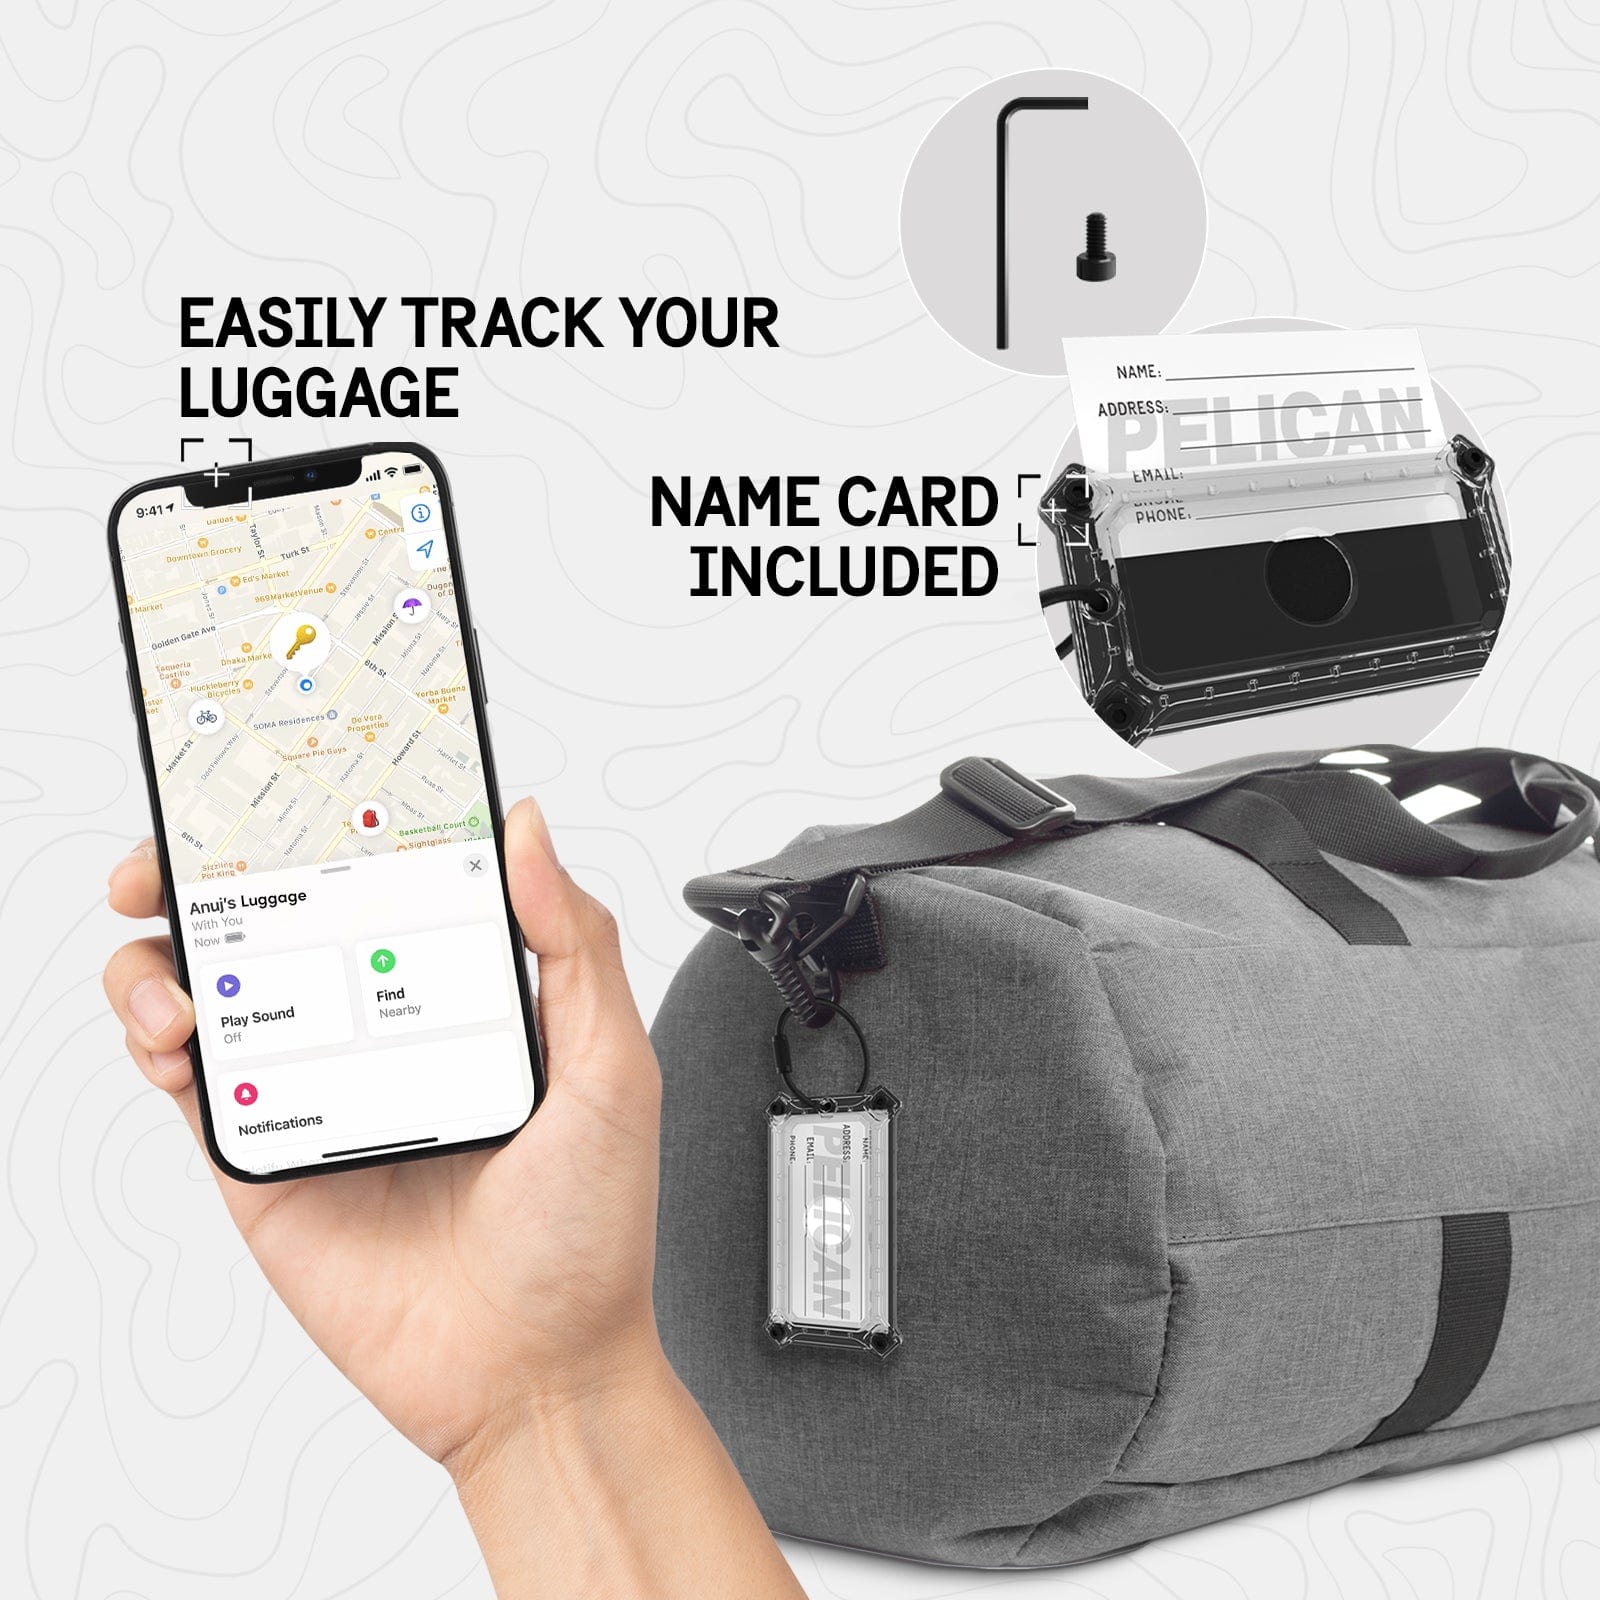 EASILY TRACK YOUR LUGGAGE. NAME CARD INCLUDED.